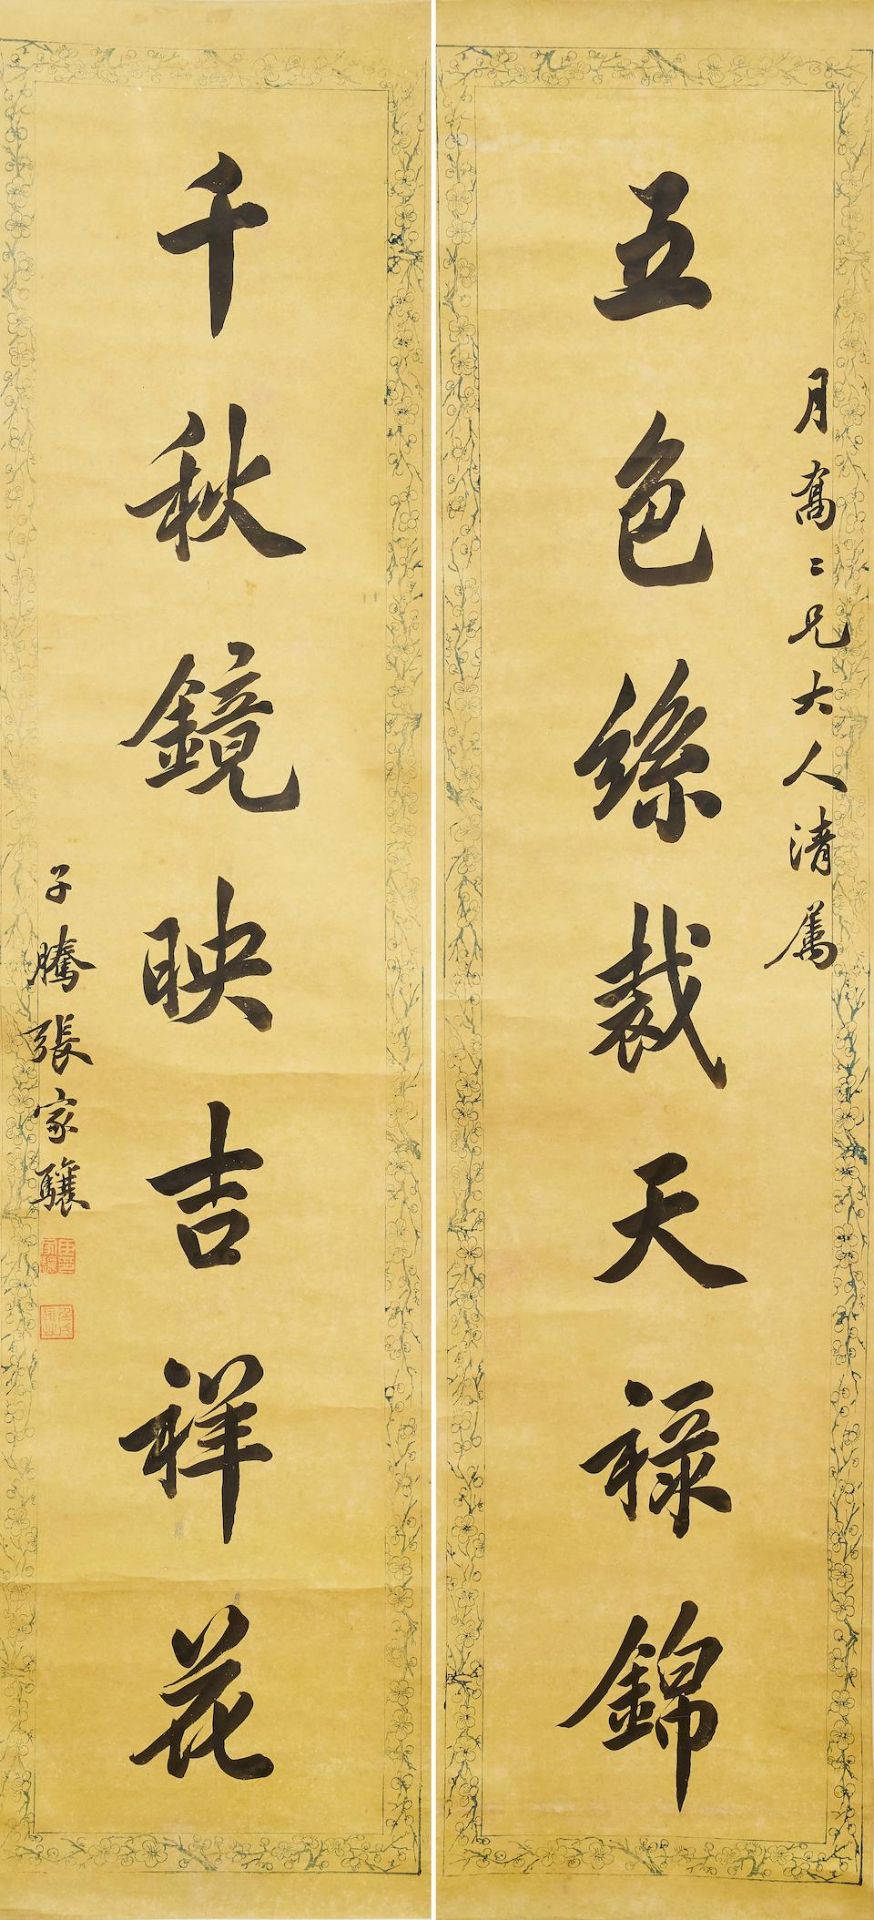 Zhang Jiaxiang (1827-1885) Calligraphy Couplet in Running Style (2)